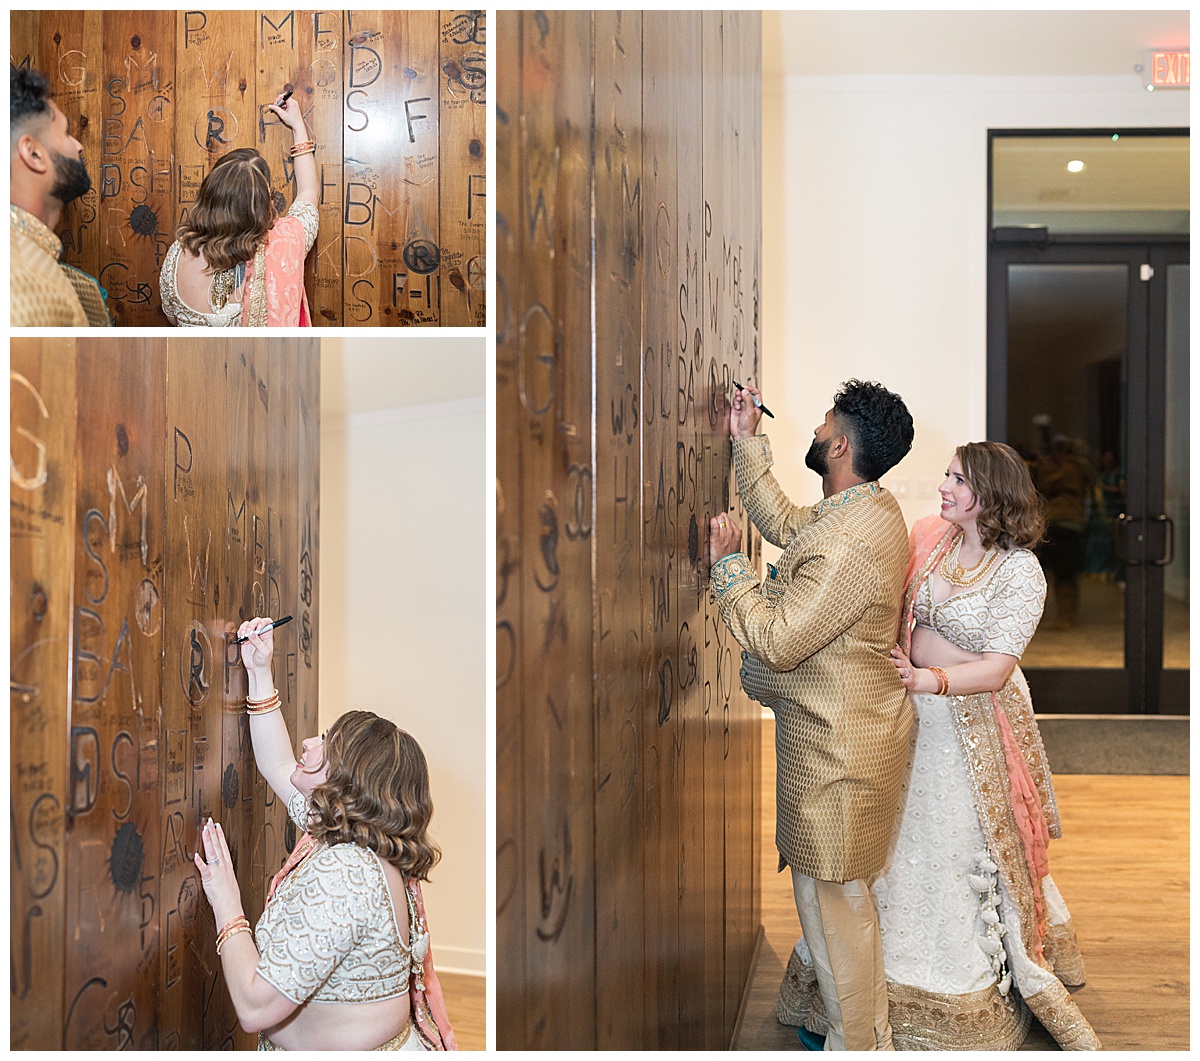 Bride and groom sign their name on branding wall for Swish & Click Photography